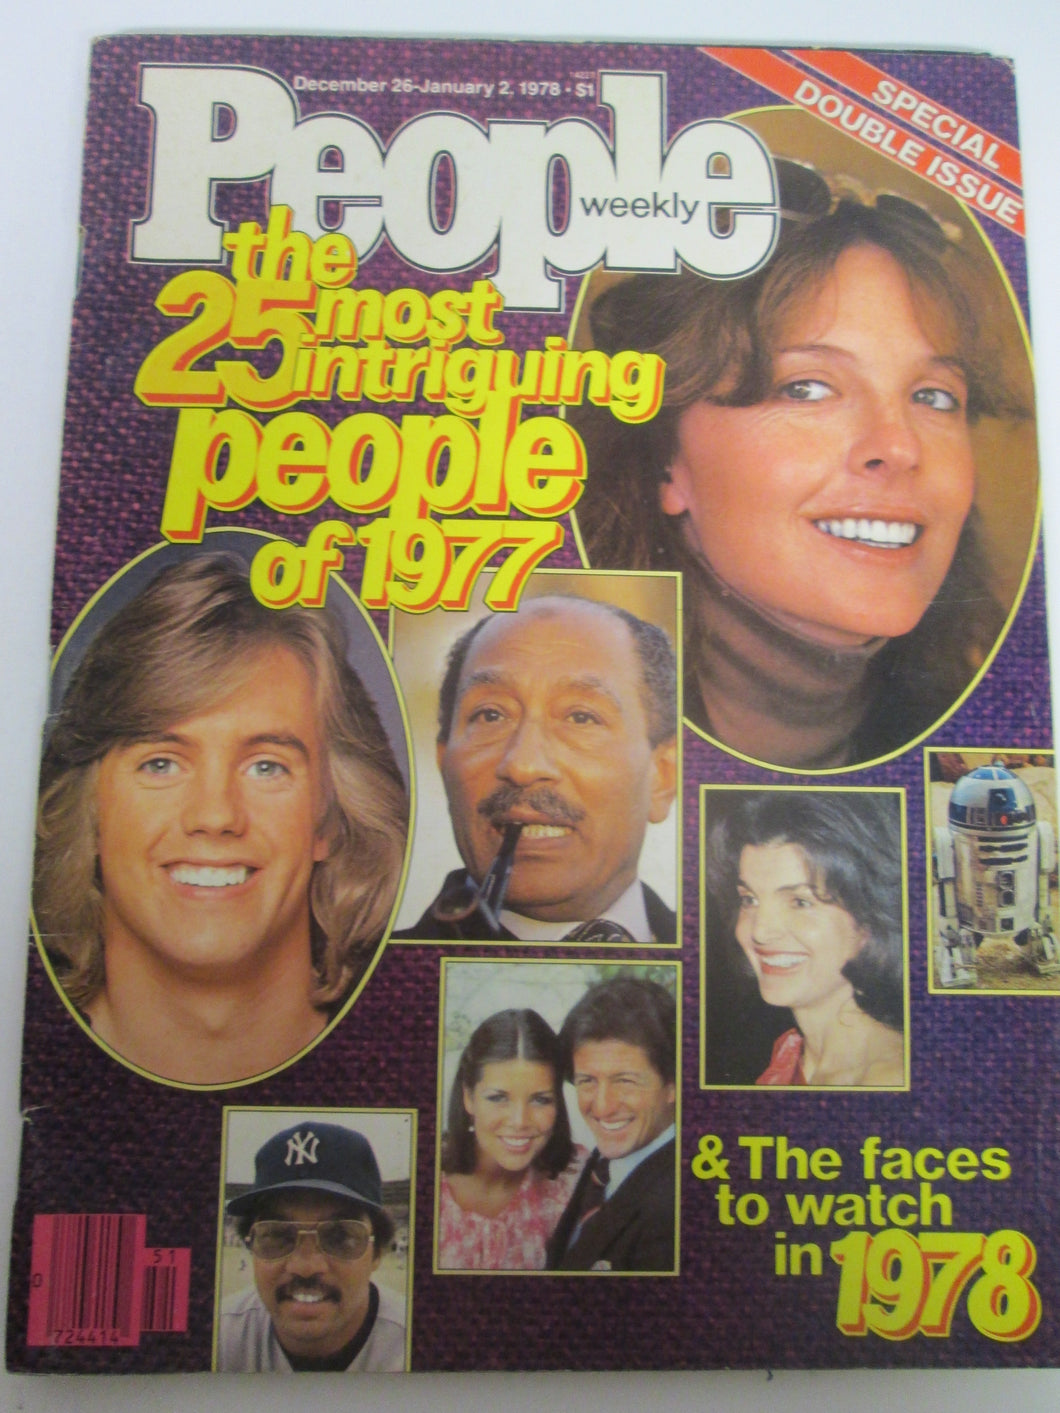 People Weekly Magazine The 25 Most Intriguing People of 1977 Dec 26-Jan 2 1978